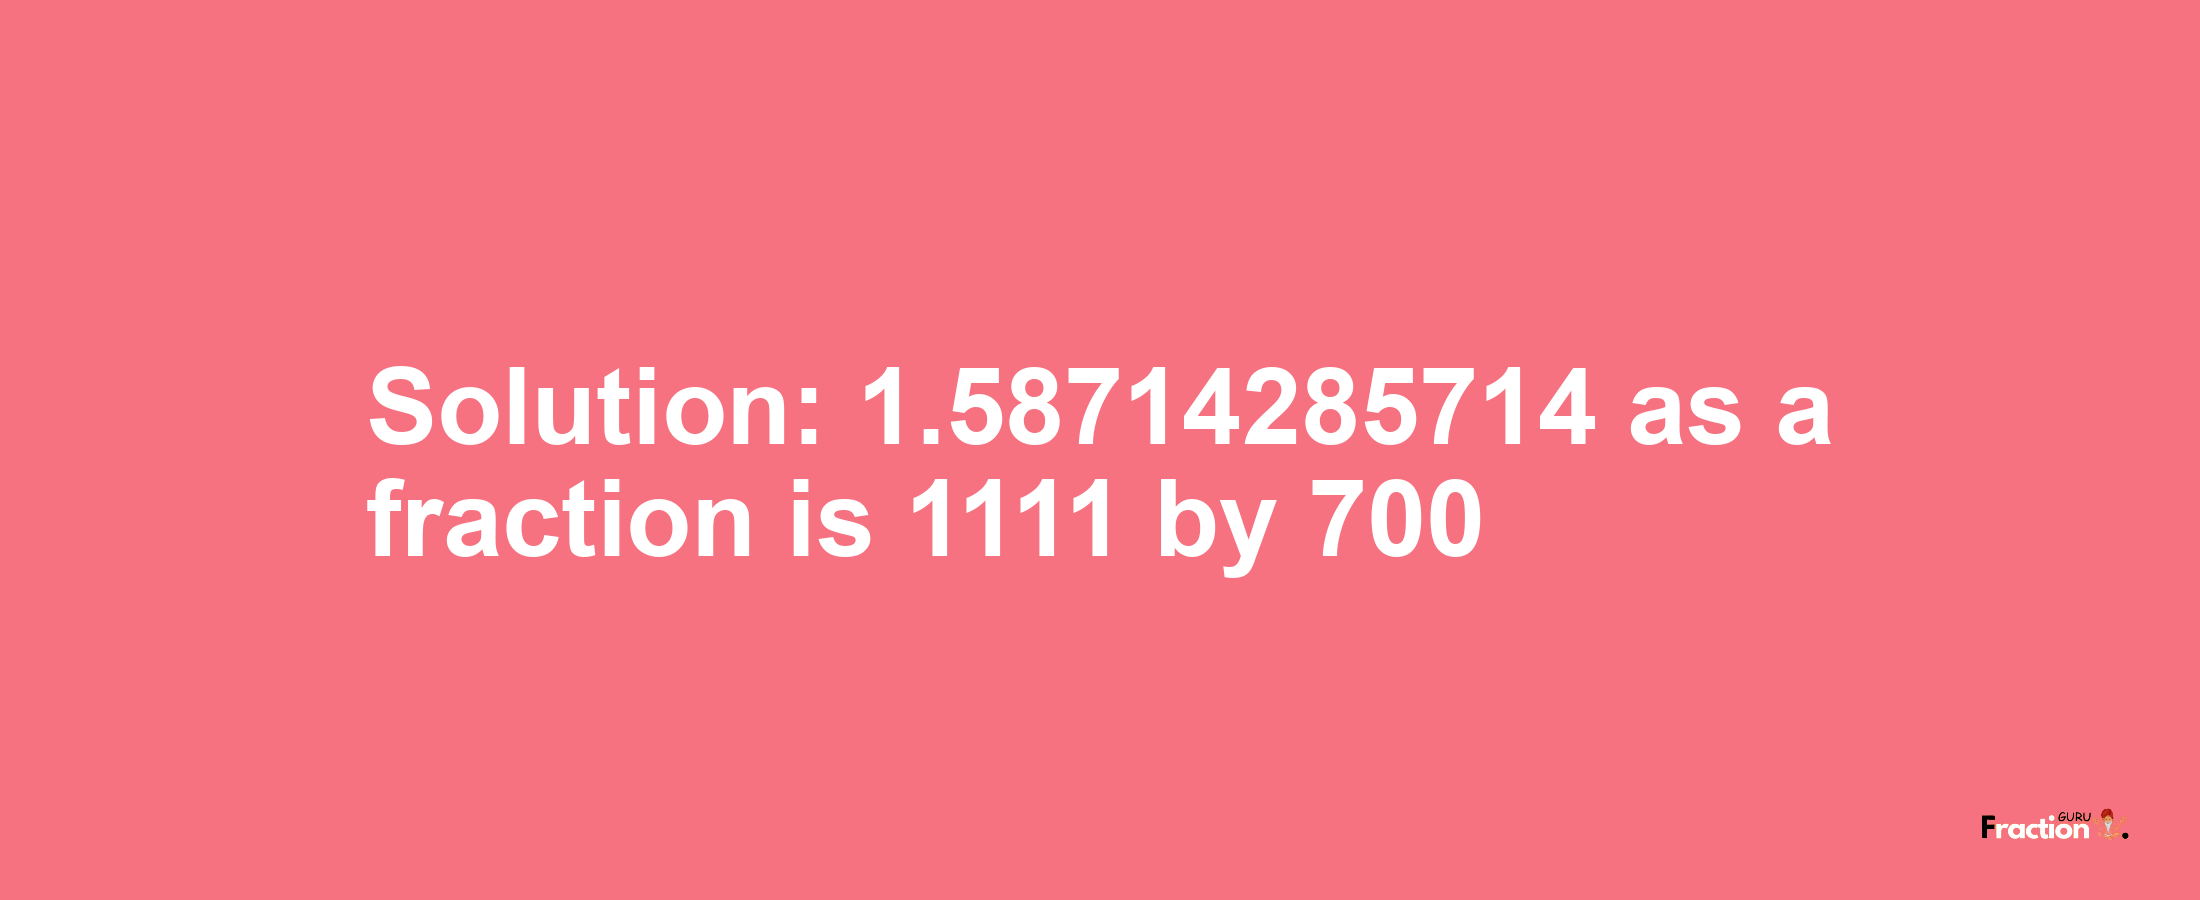 Solution:1.58714285714 as a fraction is 1111/700